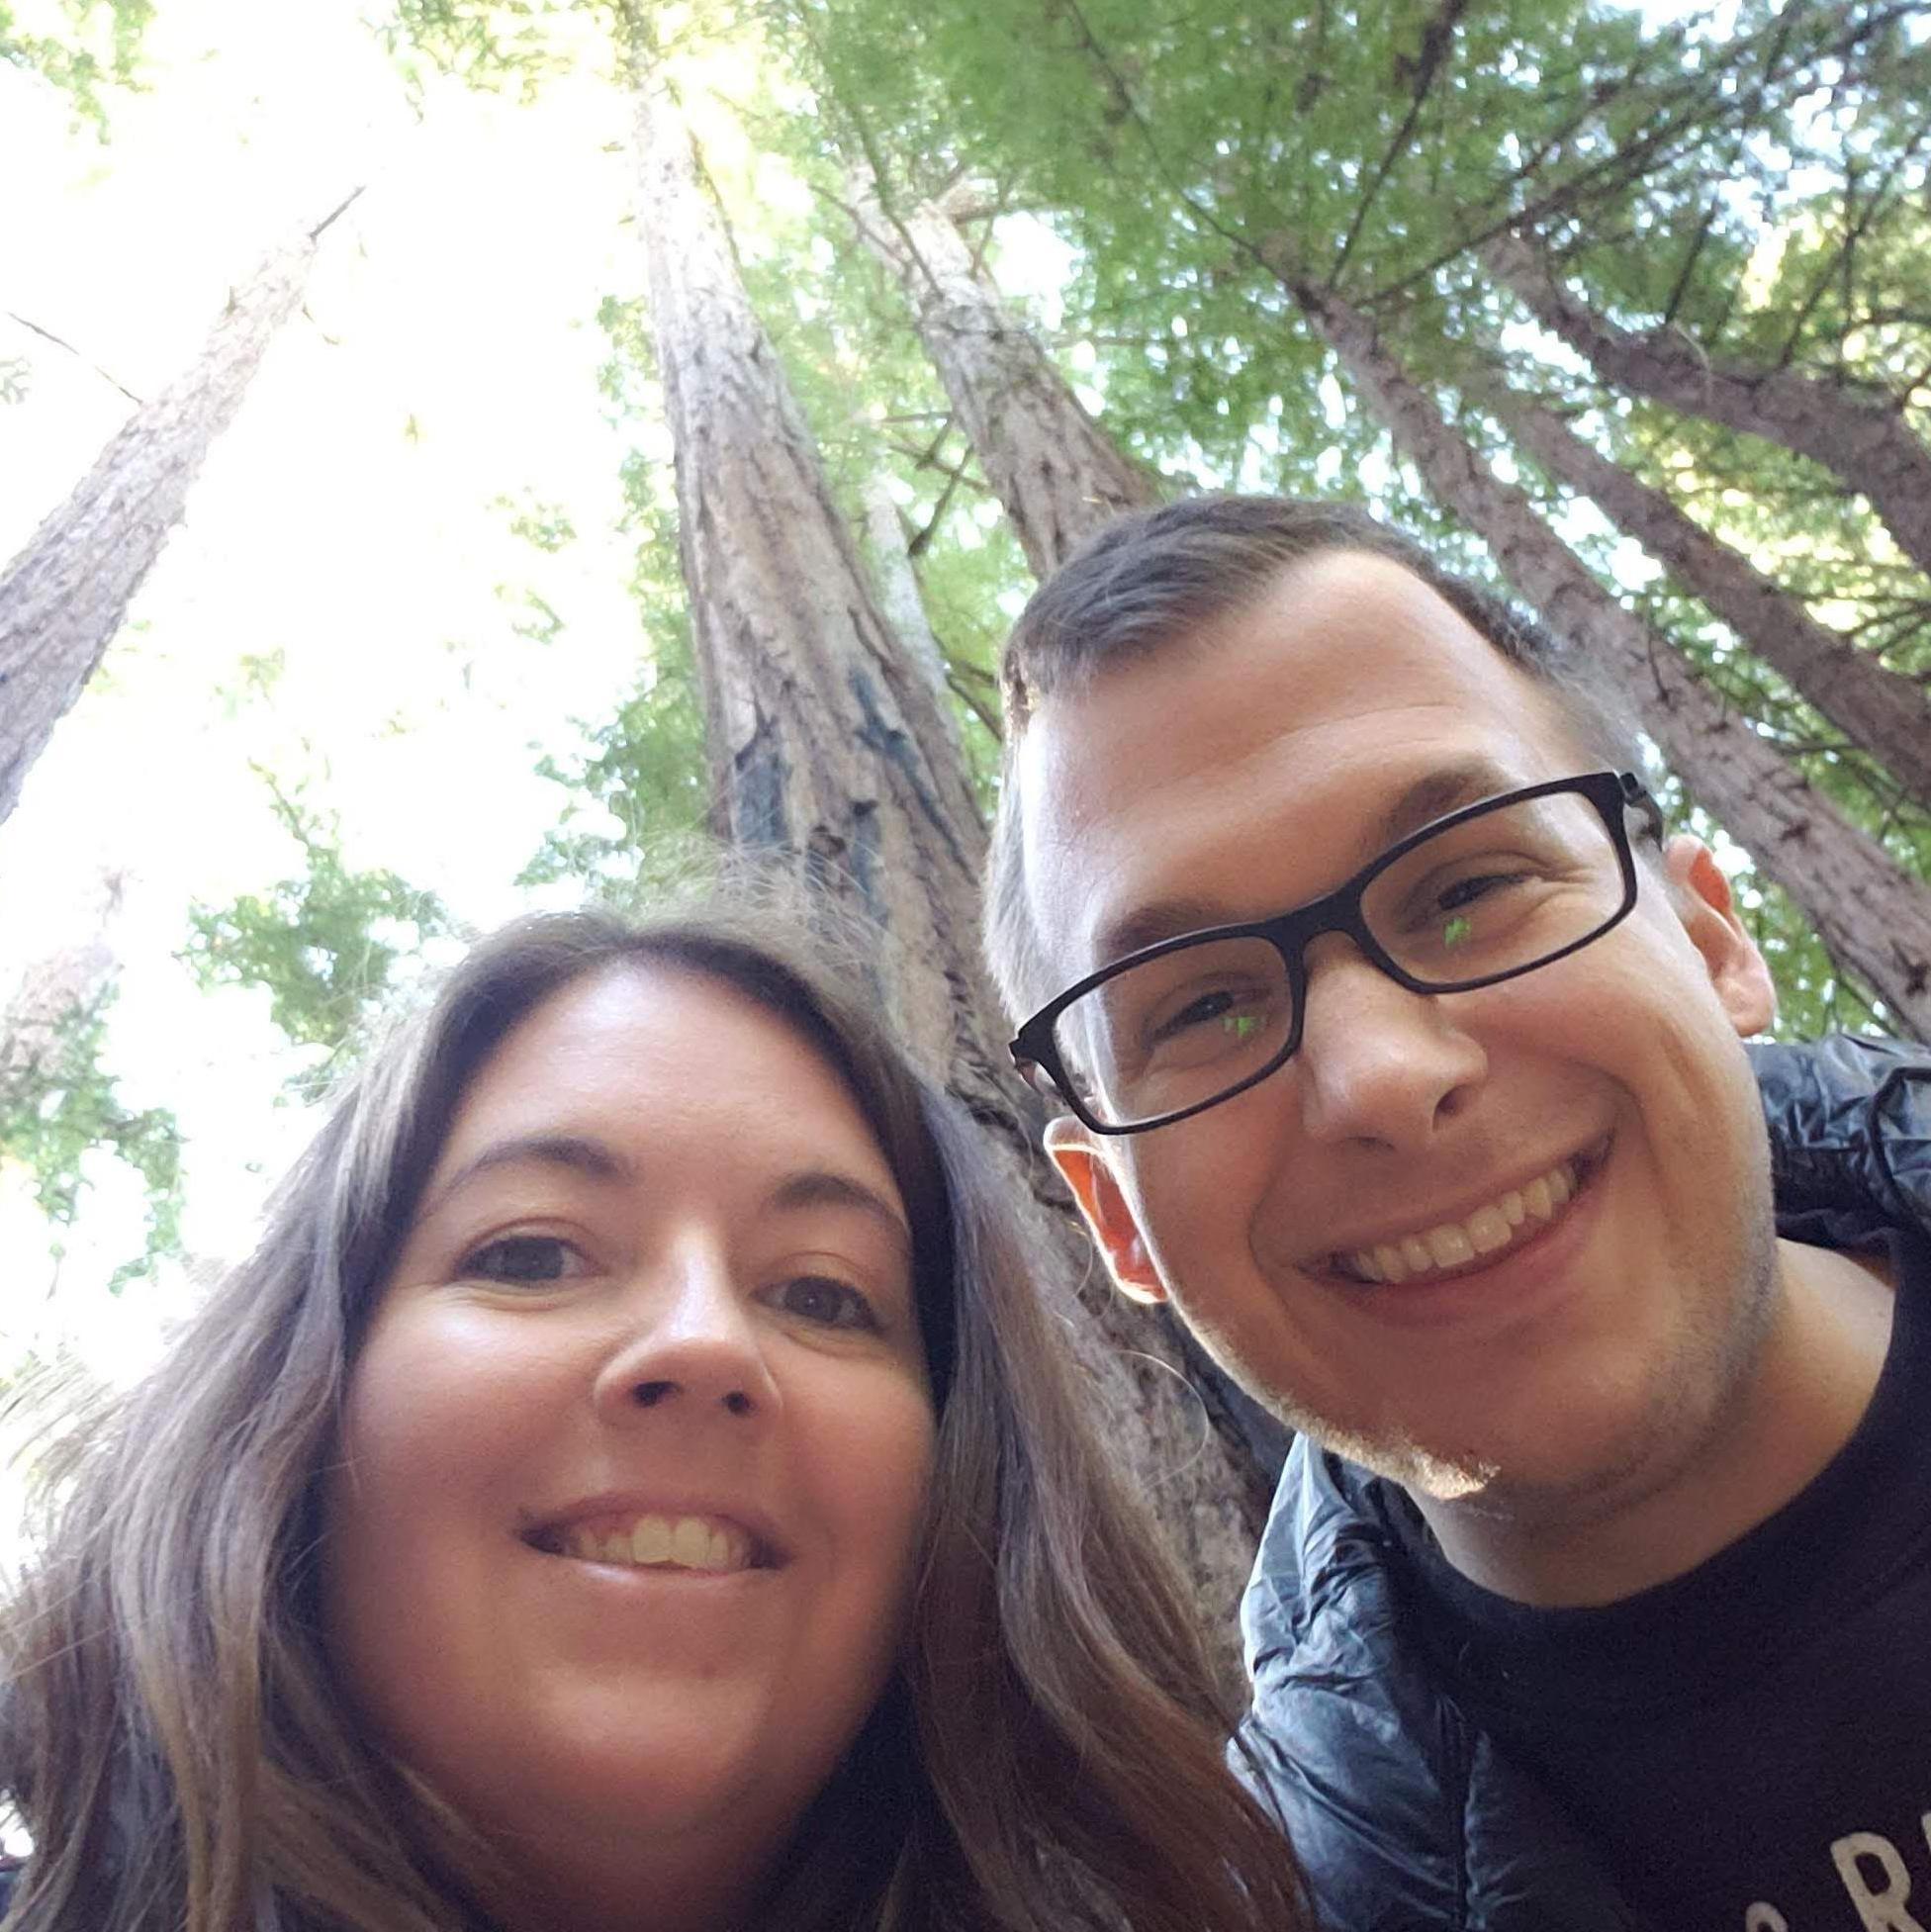 First time traveling together and questioning our existence amongst the Redwoods.